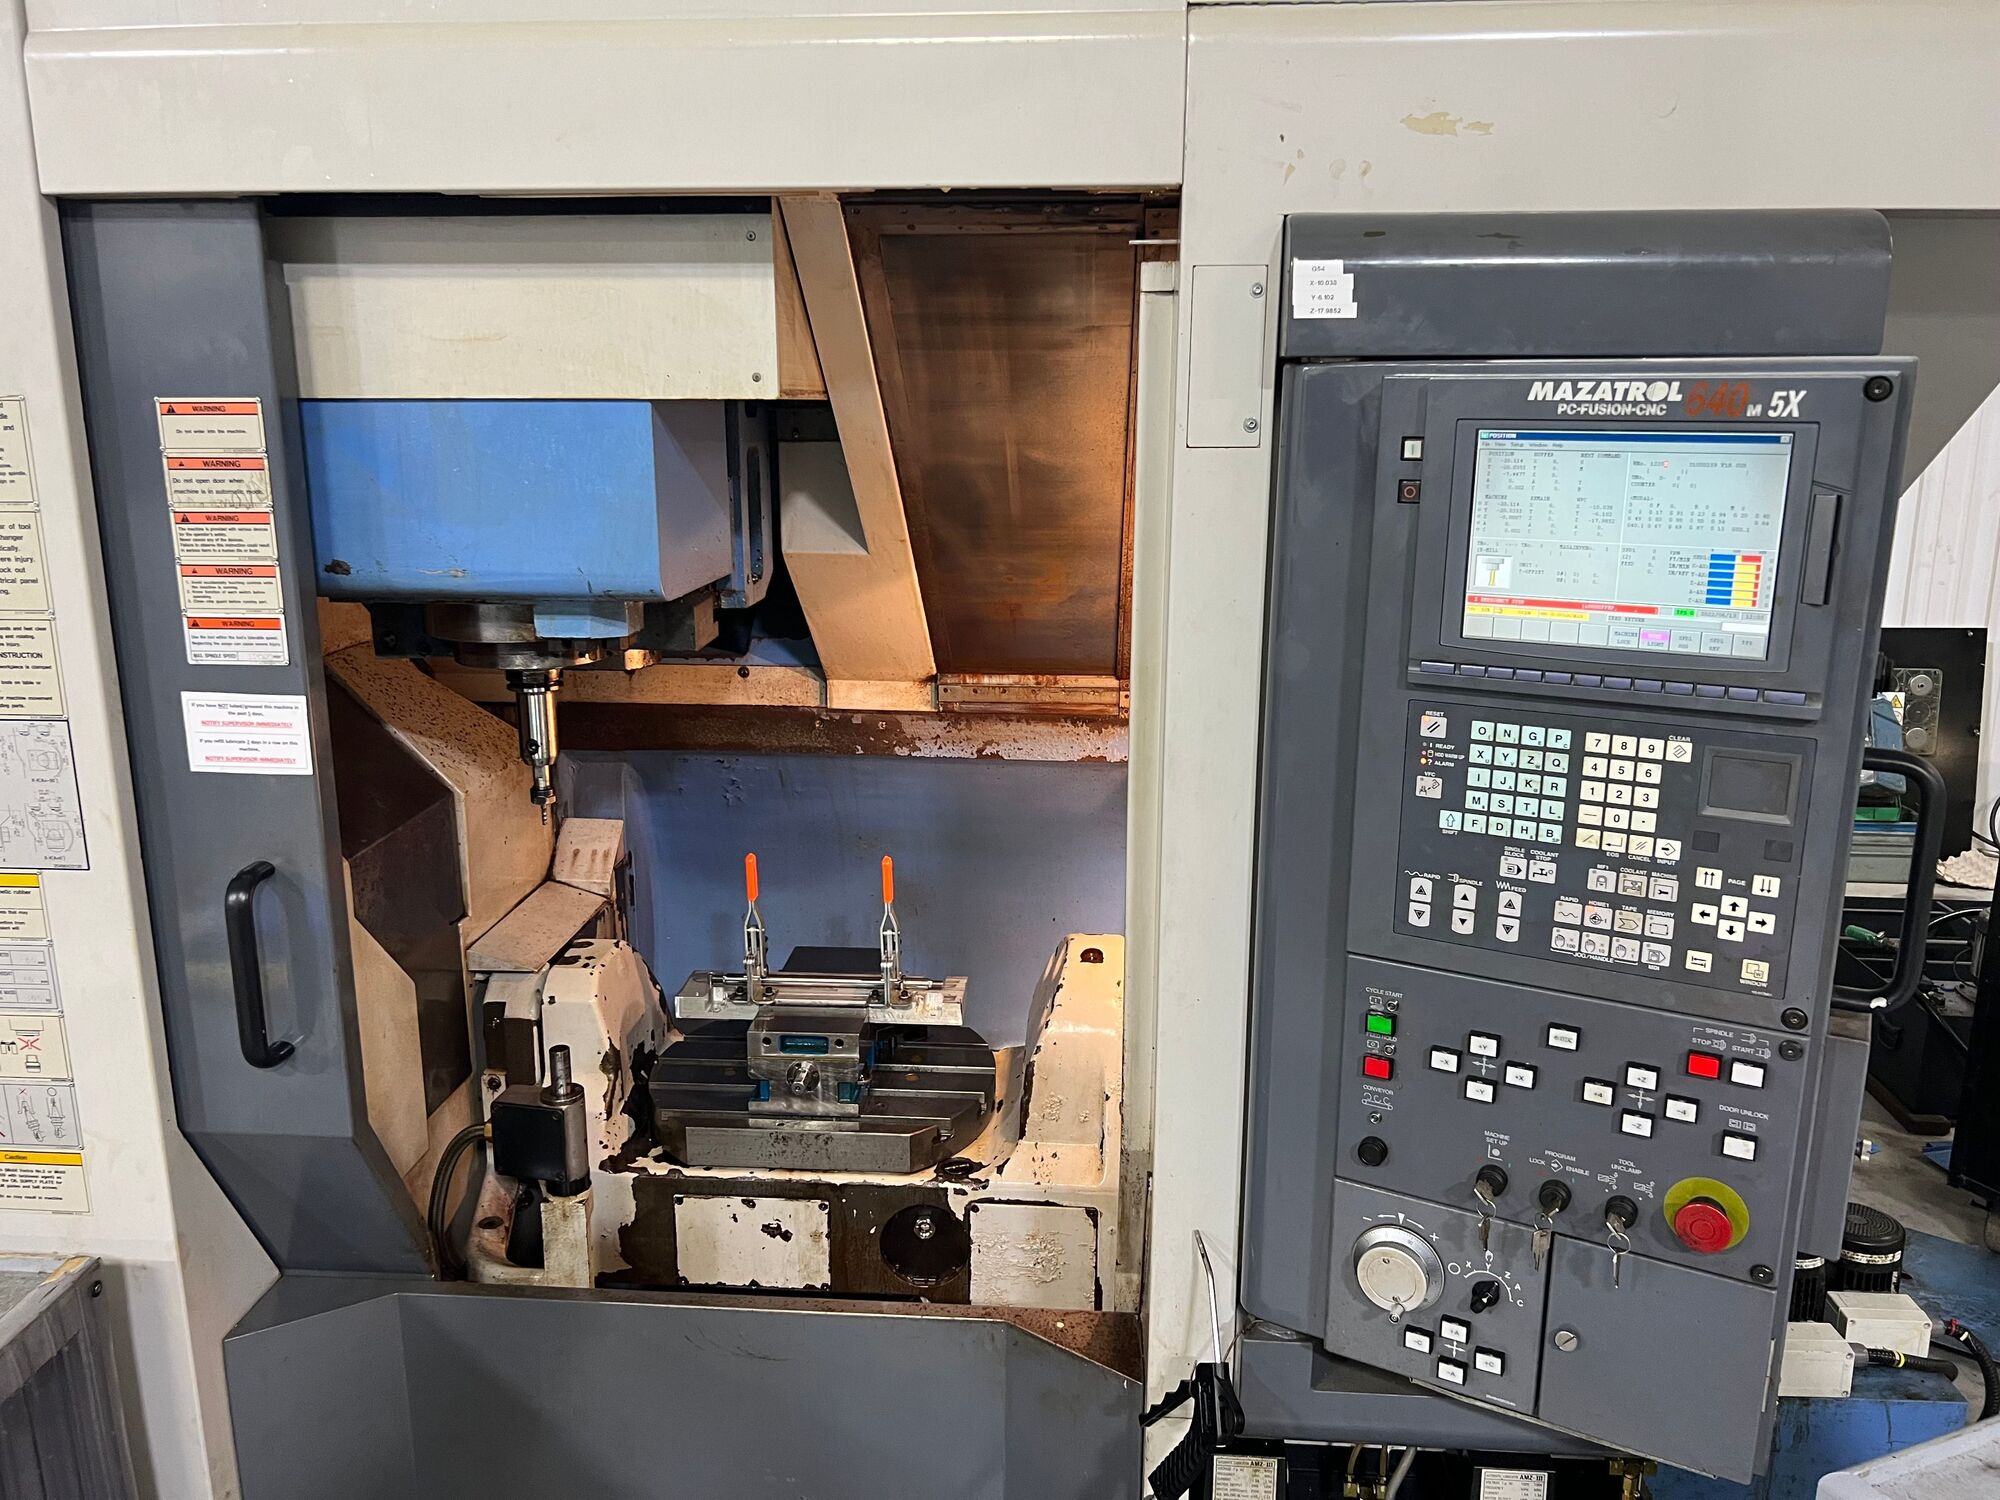 2002 MAZAK VARIAXIS 500-5X Vertical Machining Centers (5-Axis or More) | Silverlight CNC, Inc